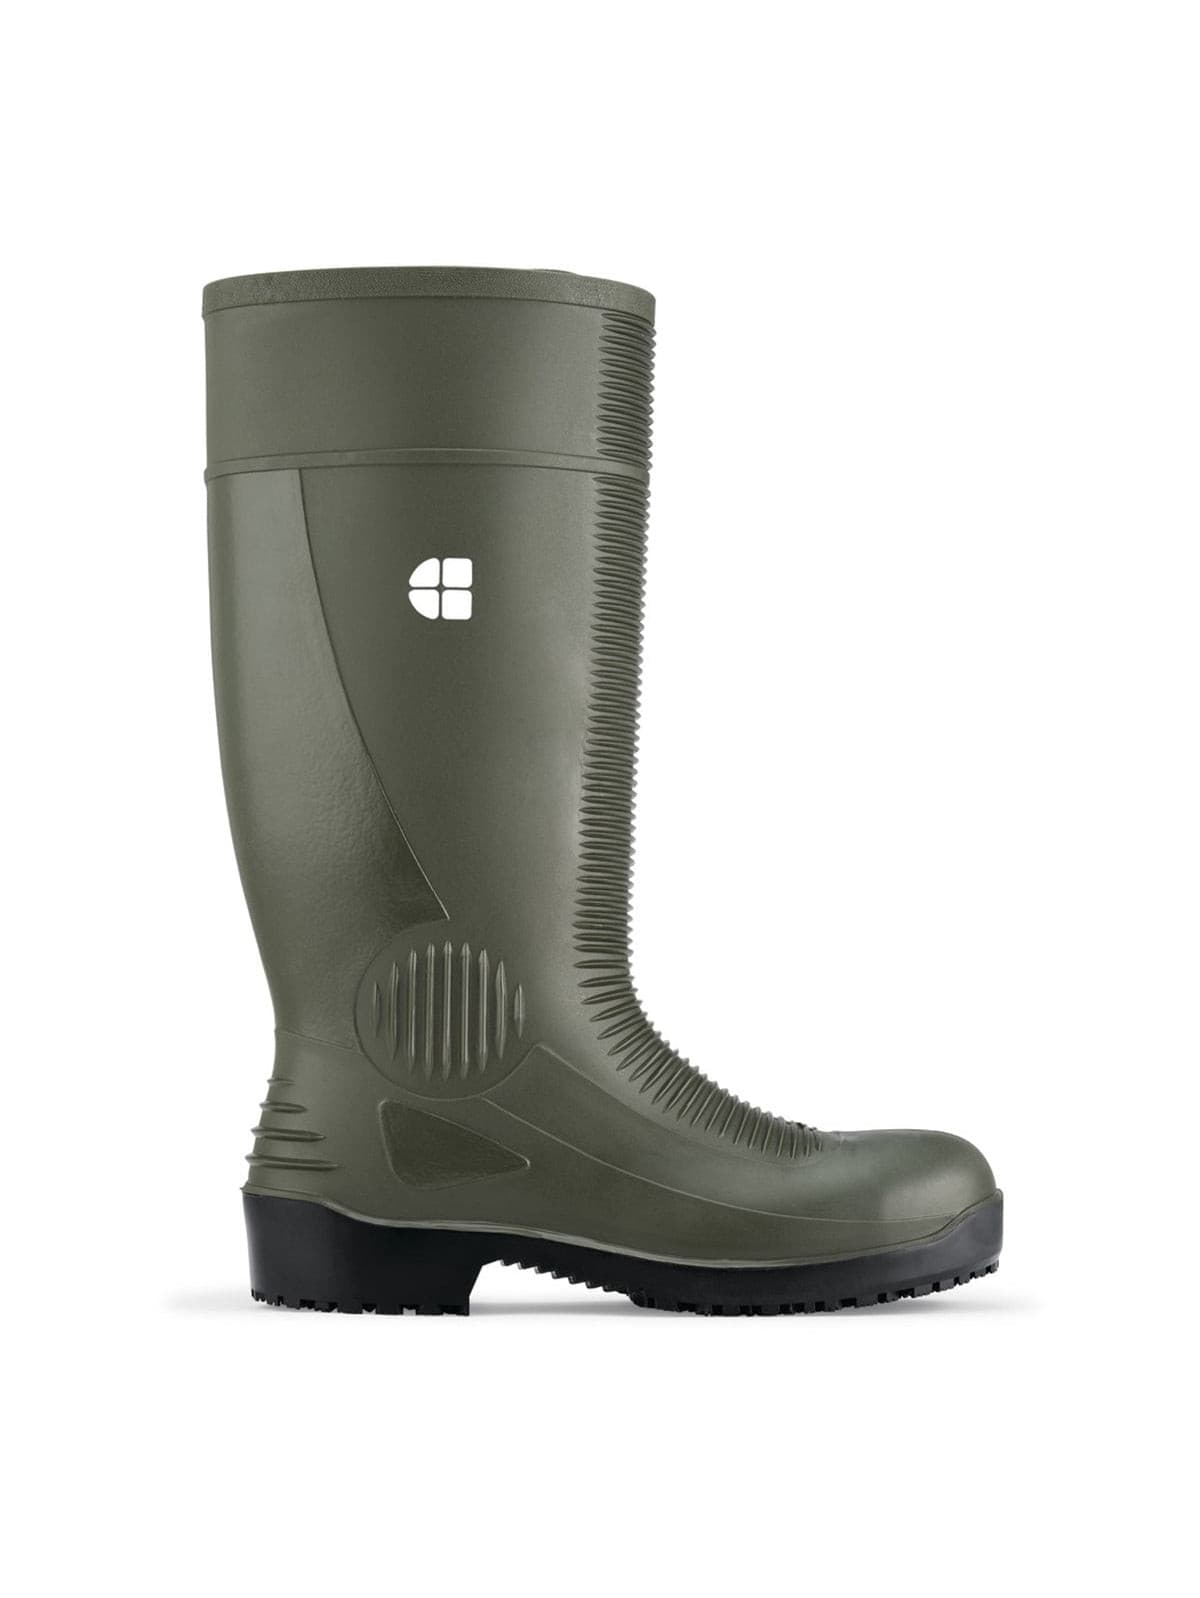 Unisex Safety Boot Bastion Green (S4) by  Shoes For Crews.